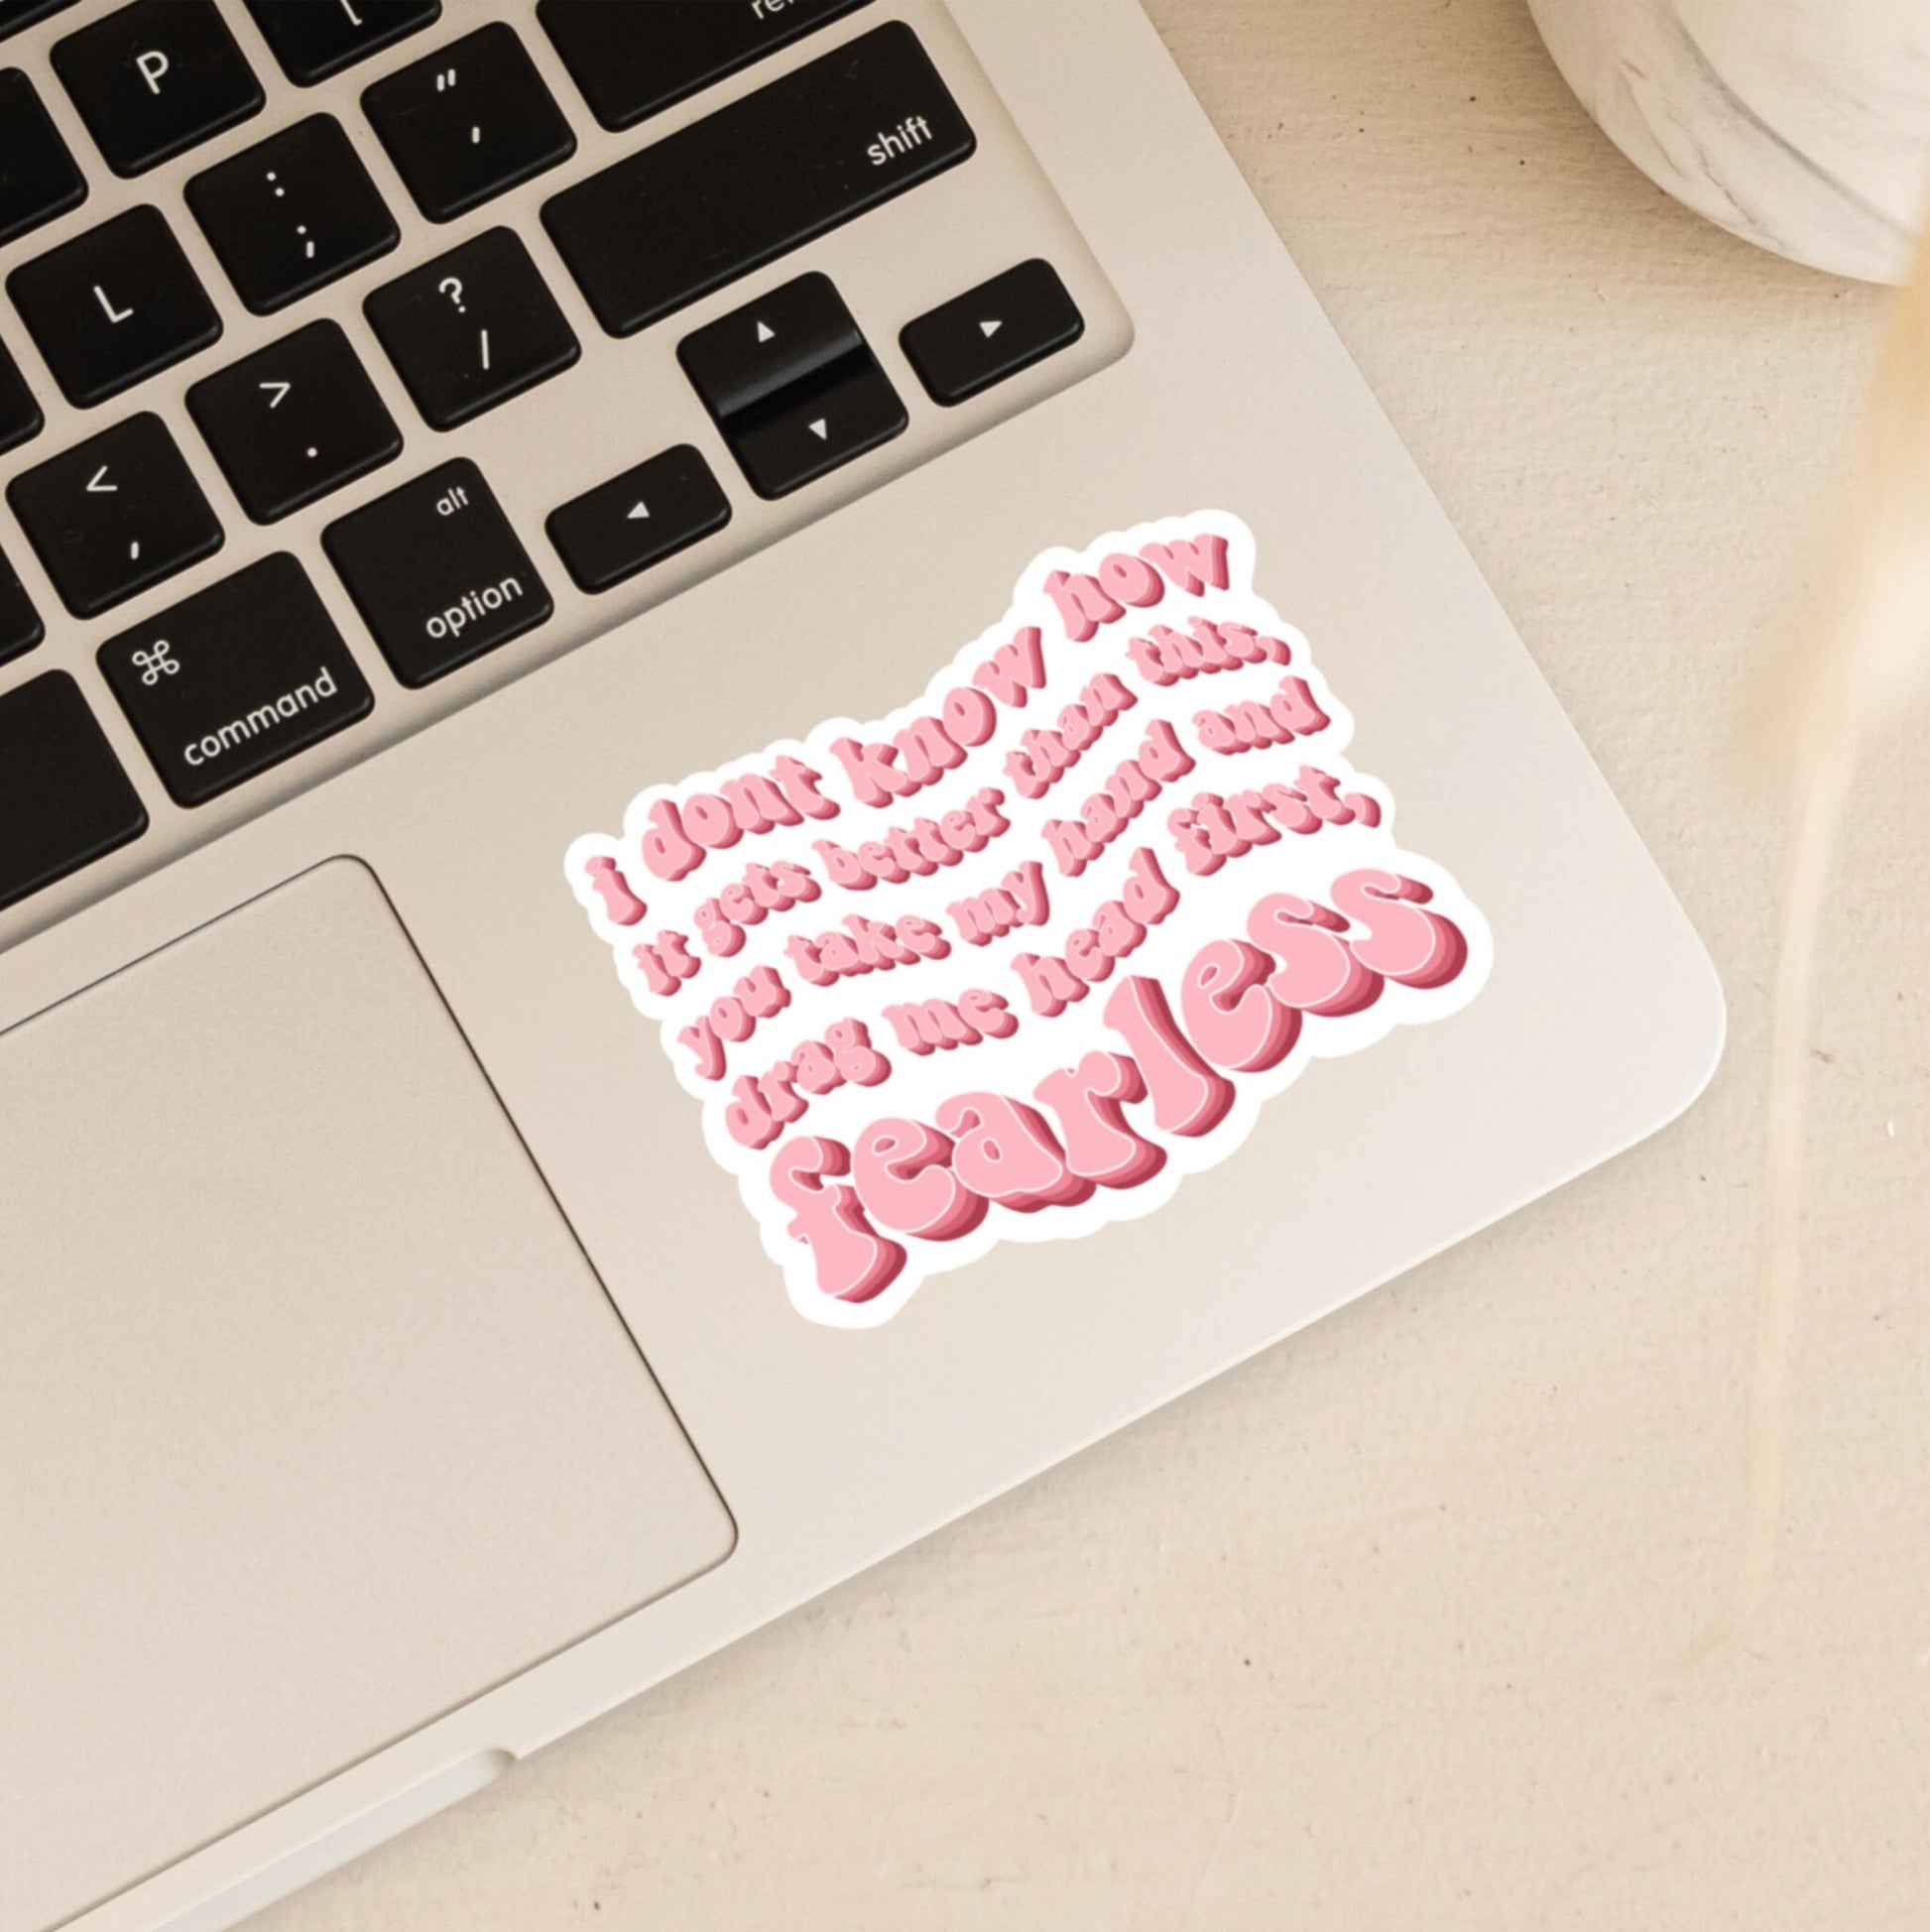 Taylor Swift Stickers for Sale  Taylor swift lyrics, Taylor swift quotes,  Print stickers